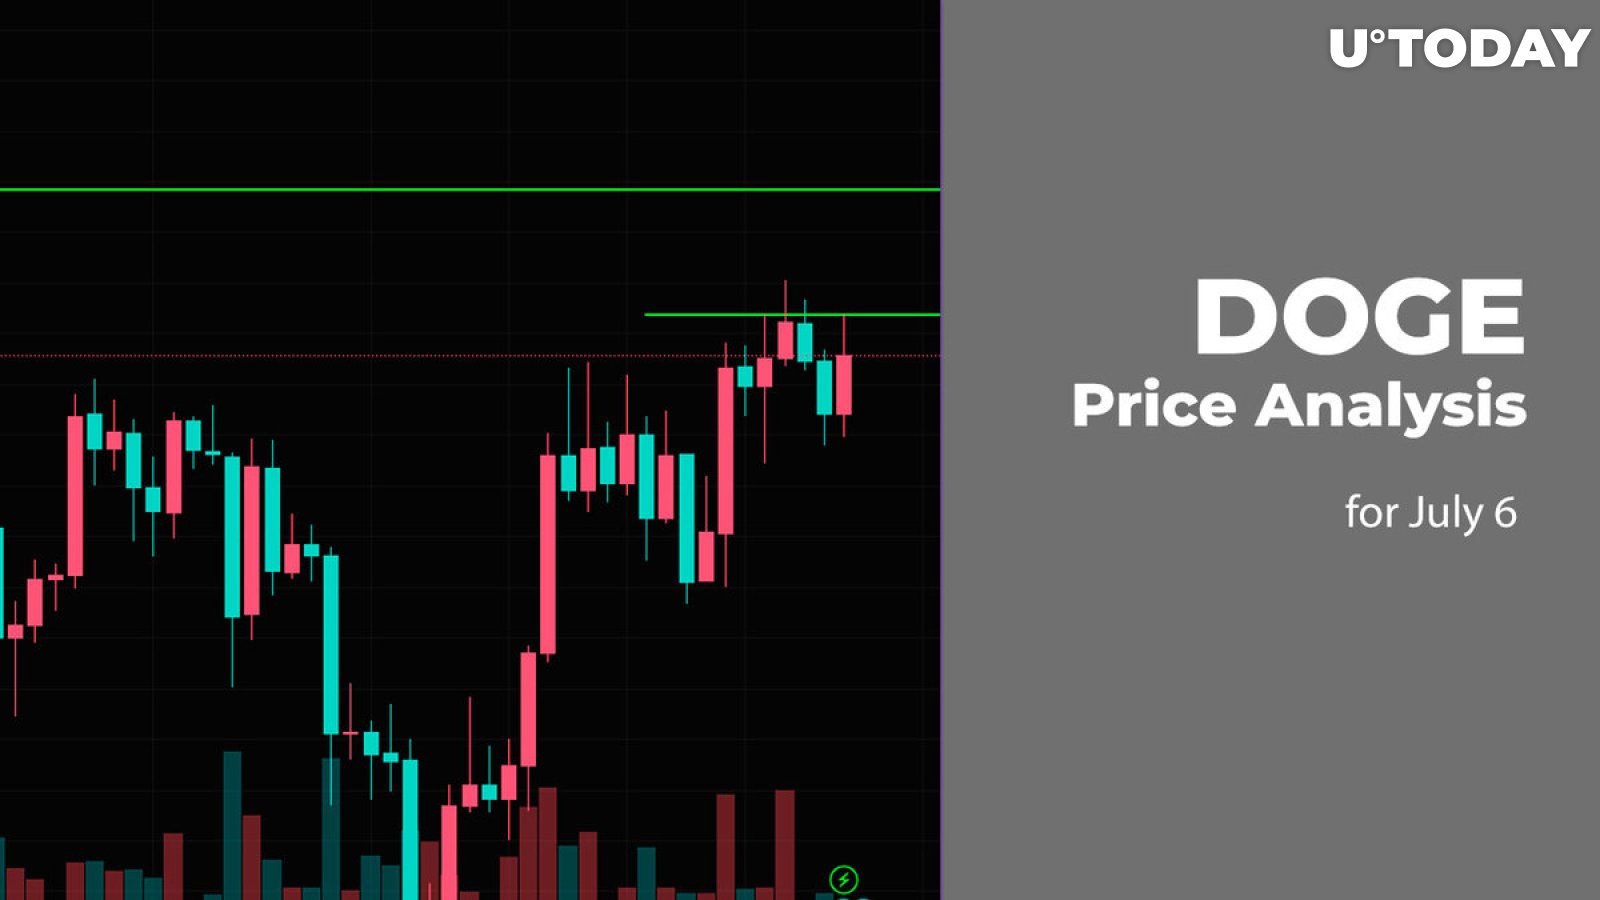 DOGE Price Analysis for July 6